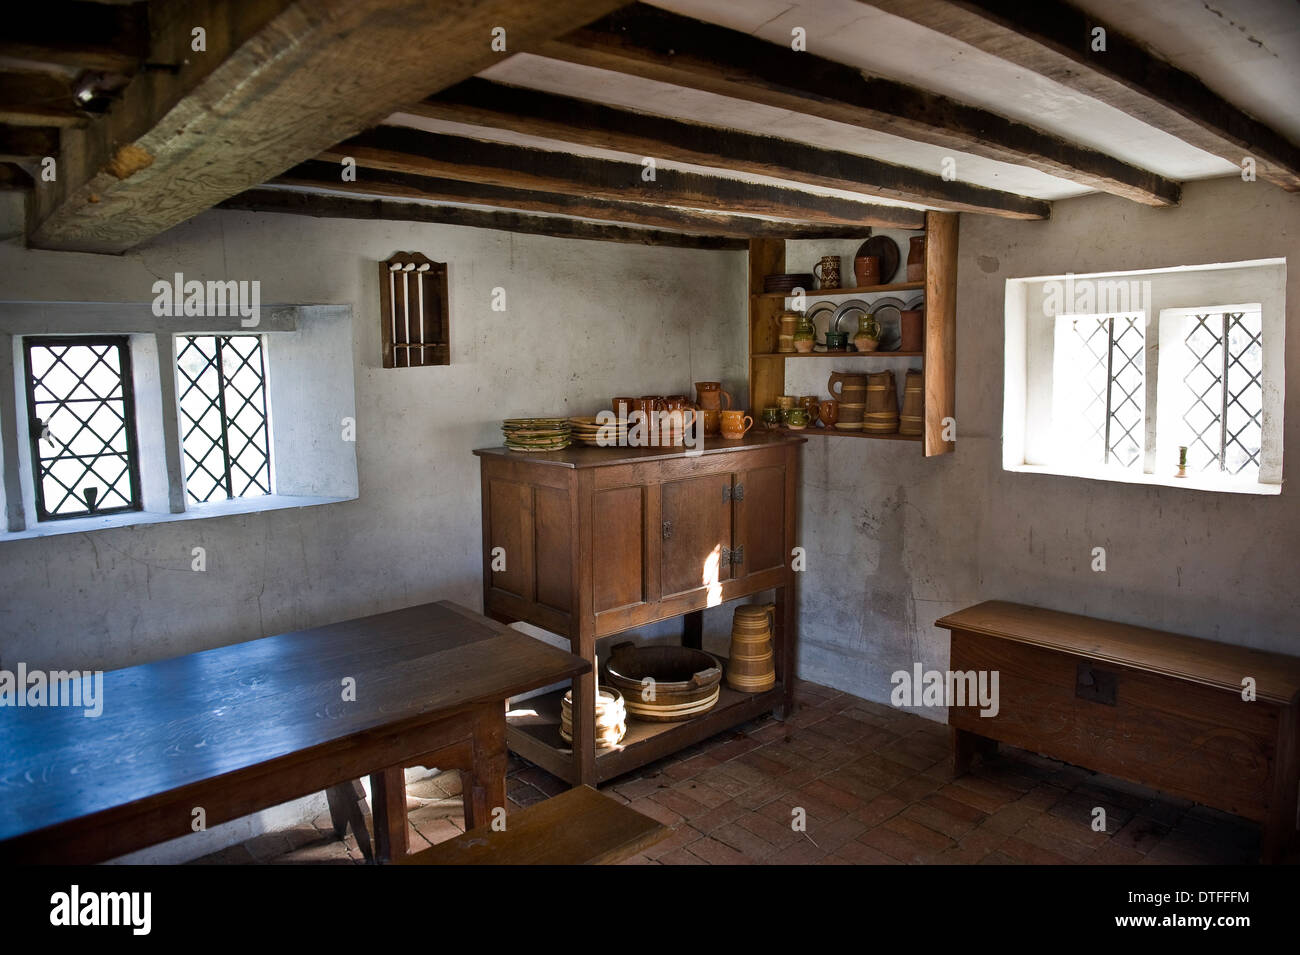 Domestic interior at the Weald & Downland Open Air Museum at Singleton, near Chichester, West Sussex, UK Stock Photo